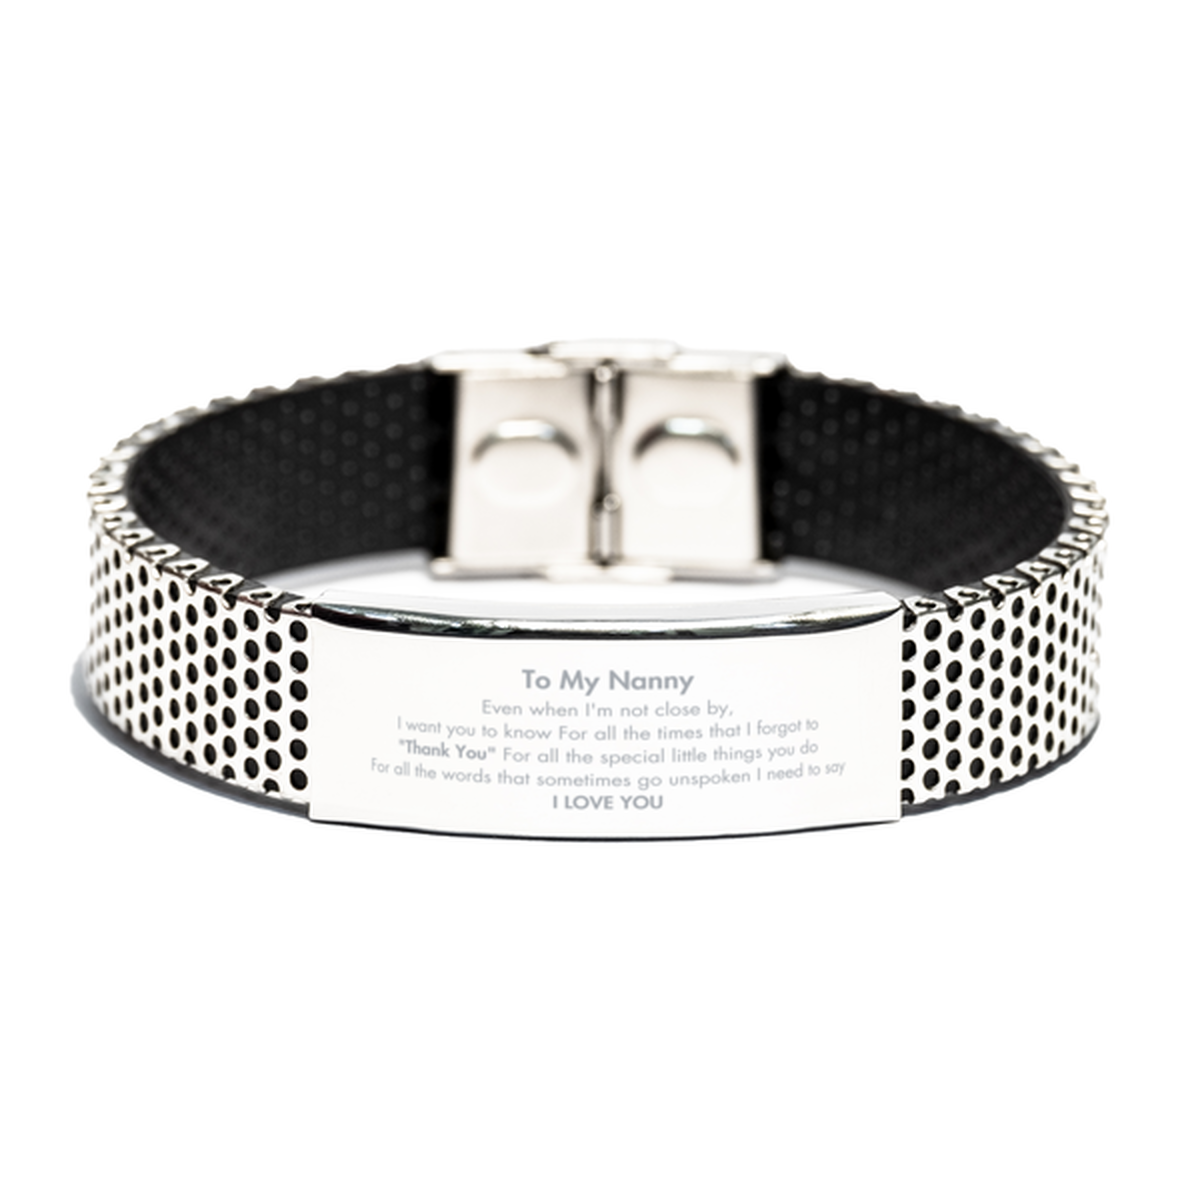 Thank You Gifts for Nanny, Keepsake Stainless Steel Bracelet Gifts for Nanny Birthday Mother's day Father's Day Nanny For all the words That sometimes go unspoken I need to say I LOVE YOU